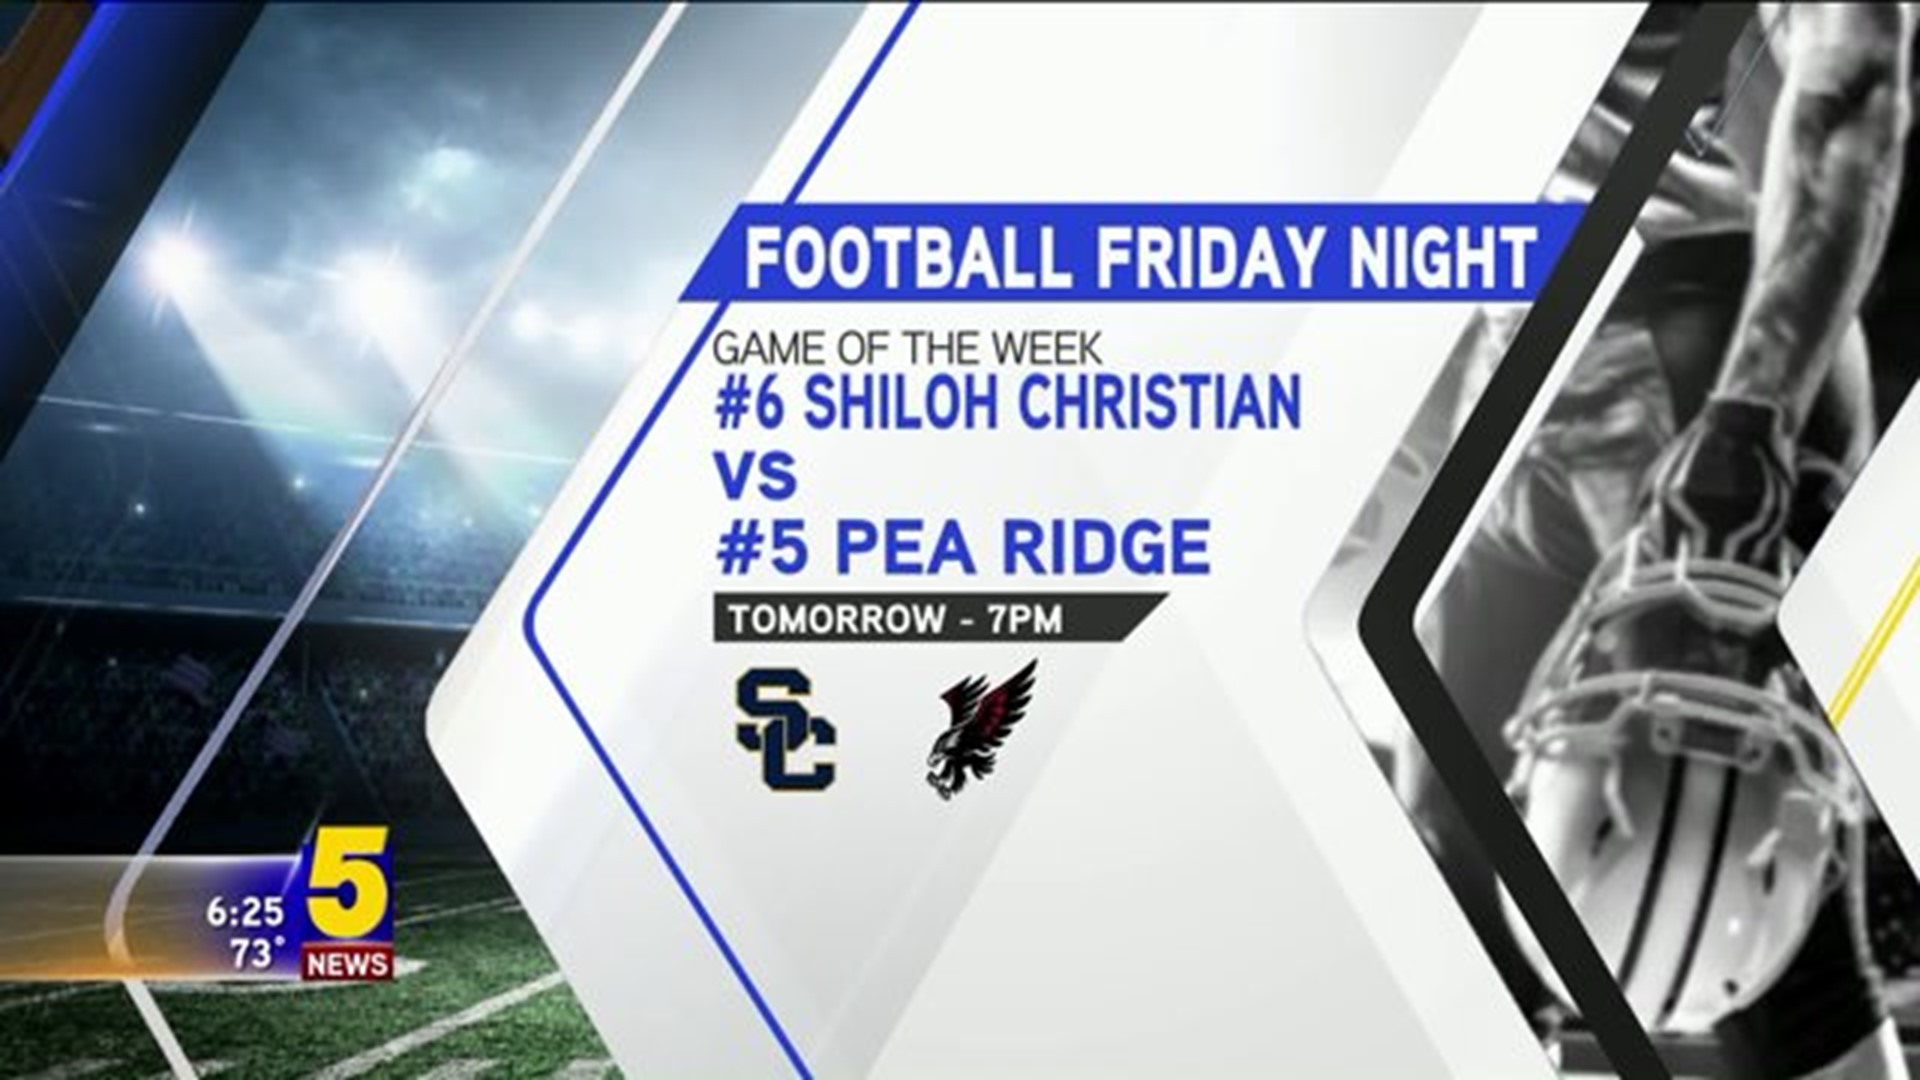 Game of the Week Preview